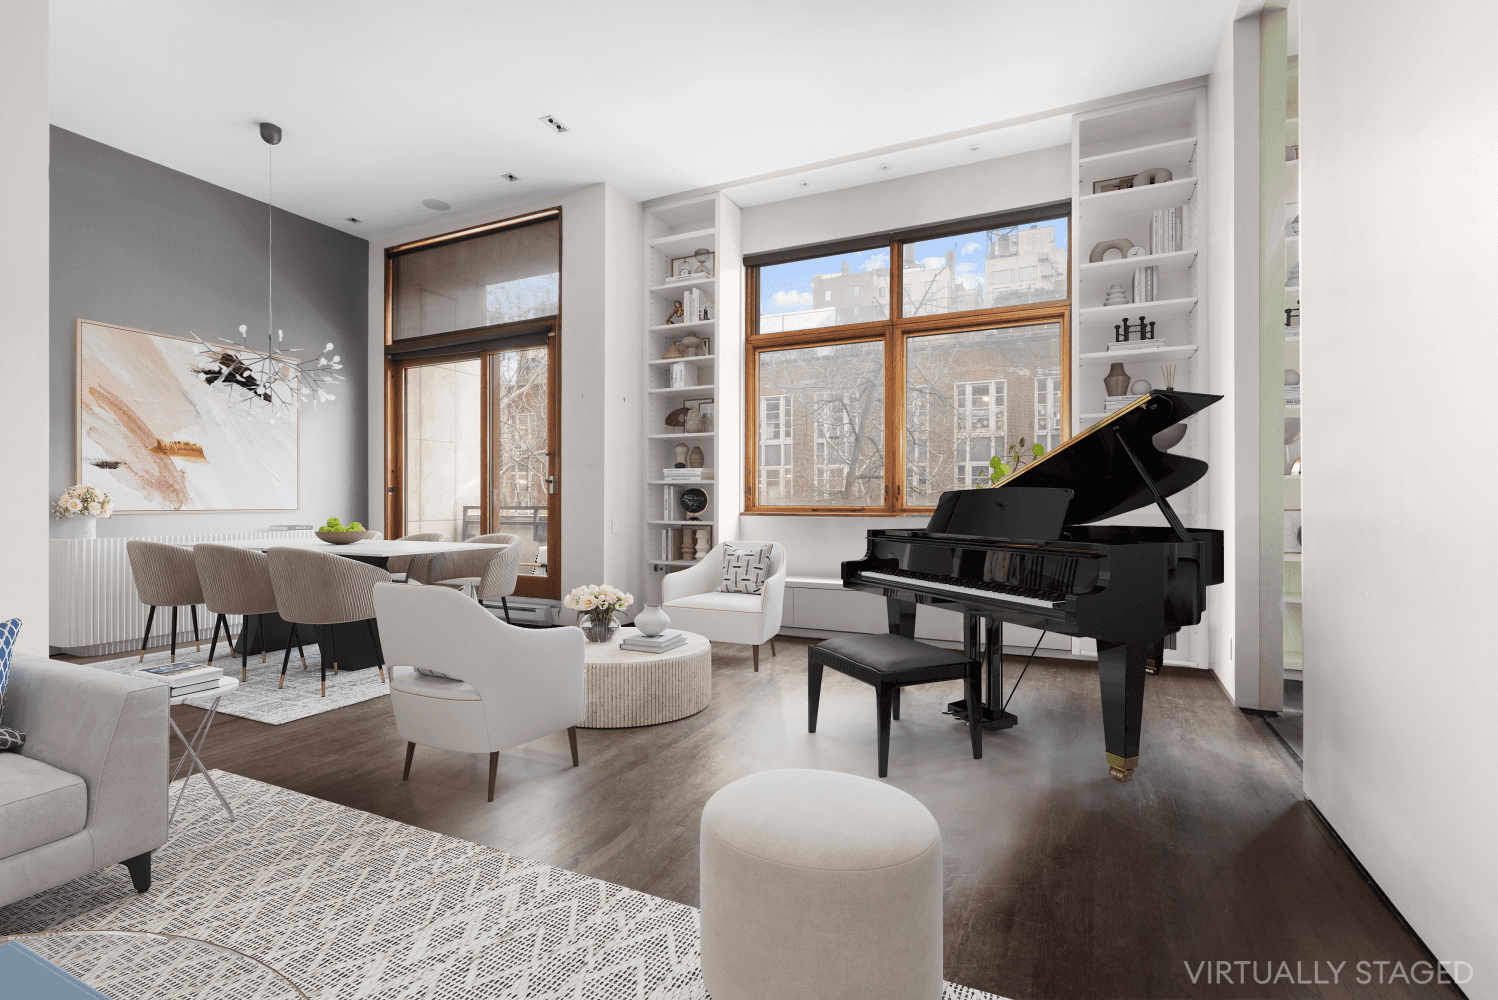 Indulge in the epitome of luxury living at this exquisite 2 bedroom, 2 bathroom Duplex residence situated on prestigious Madison Avenue within a distinguished condominium envisioned by the esteemed architect ...